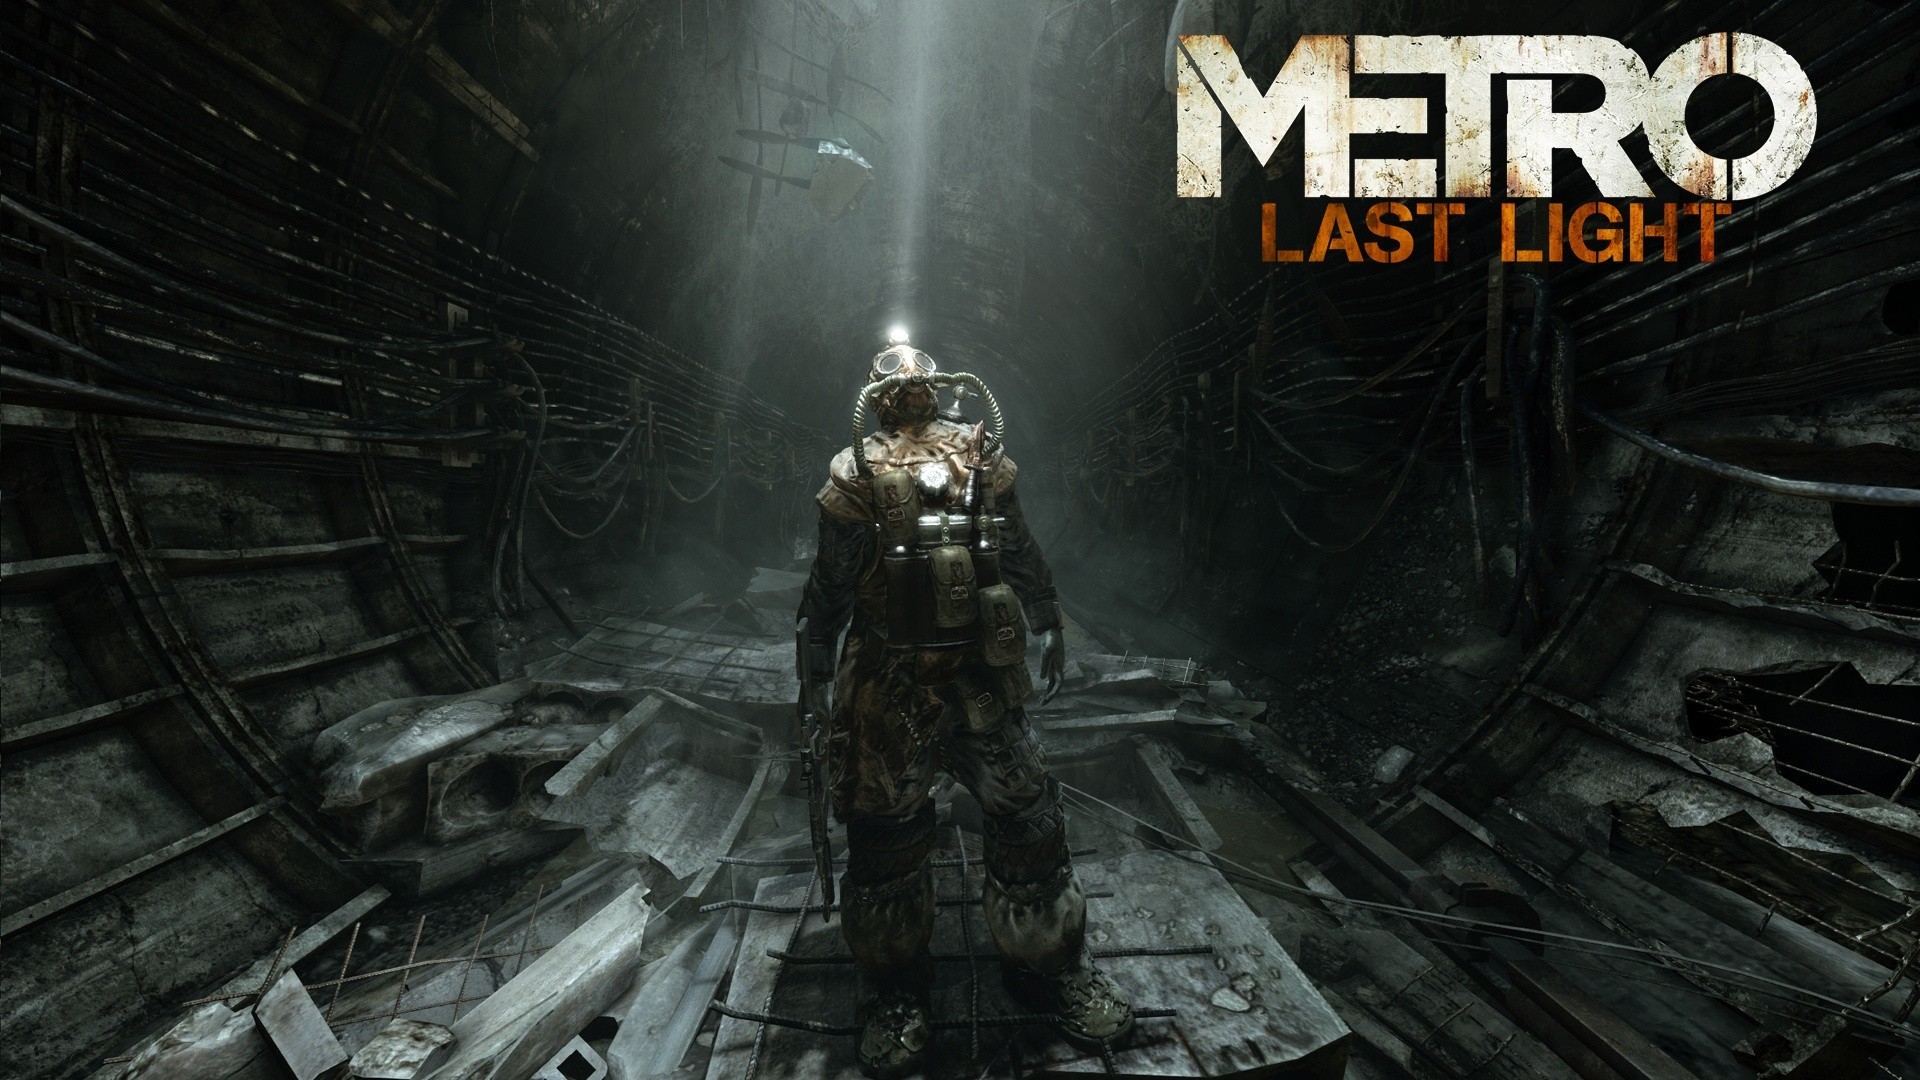 General 1920x1080 Metro: Last Light video games video game art 4A Games futuristic apocalyptic PC gaming